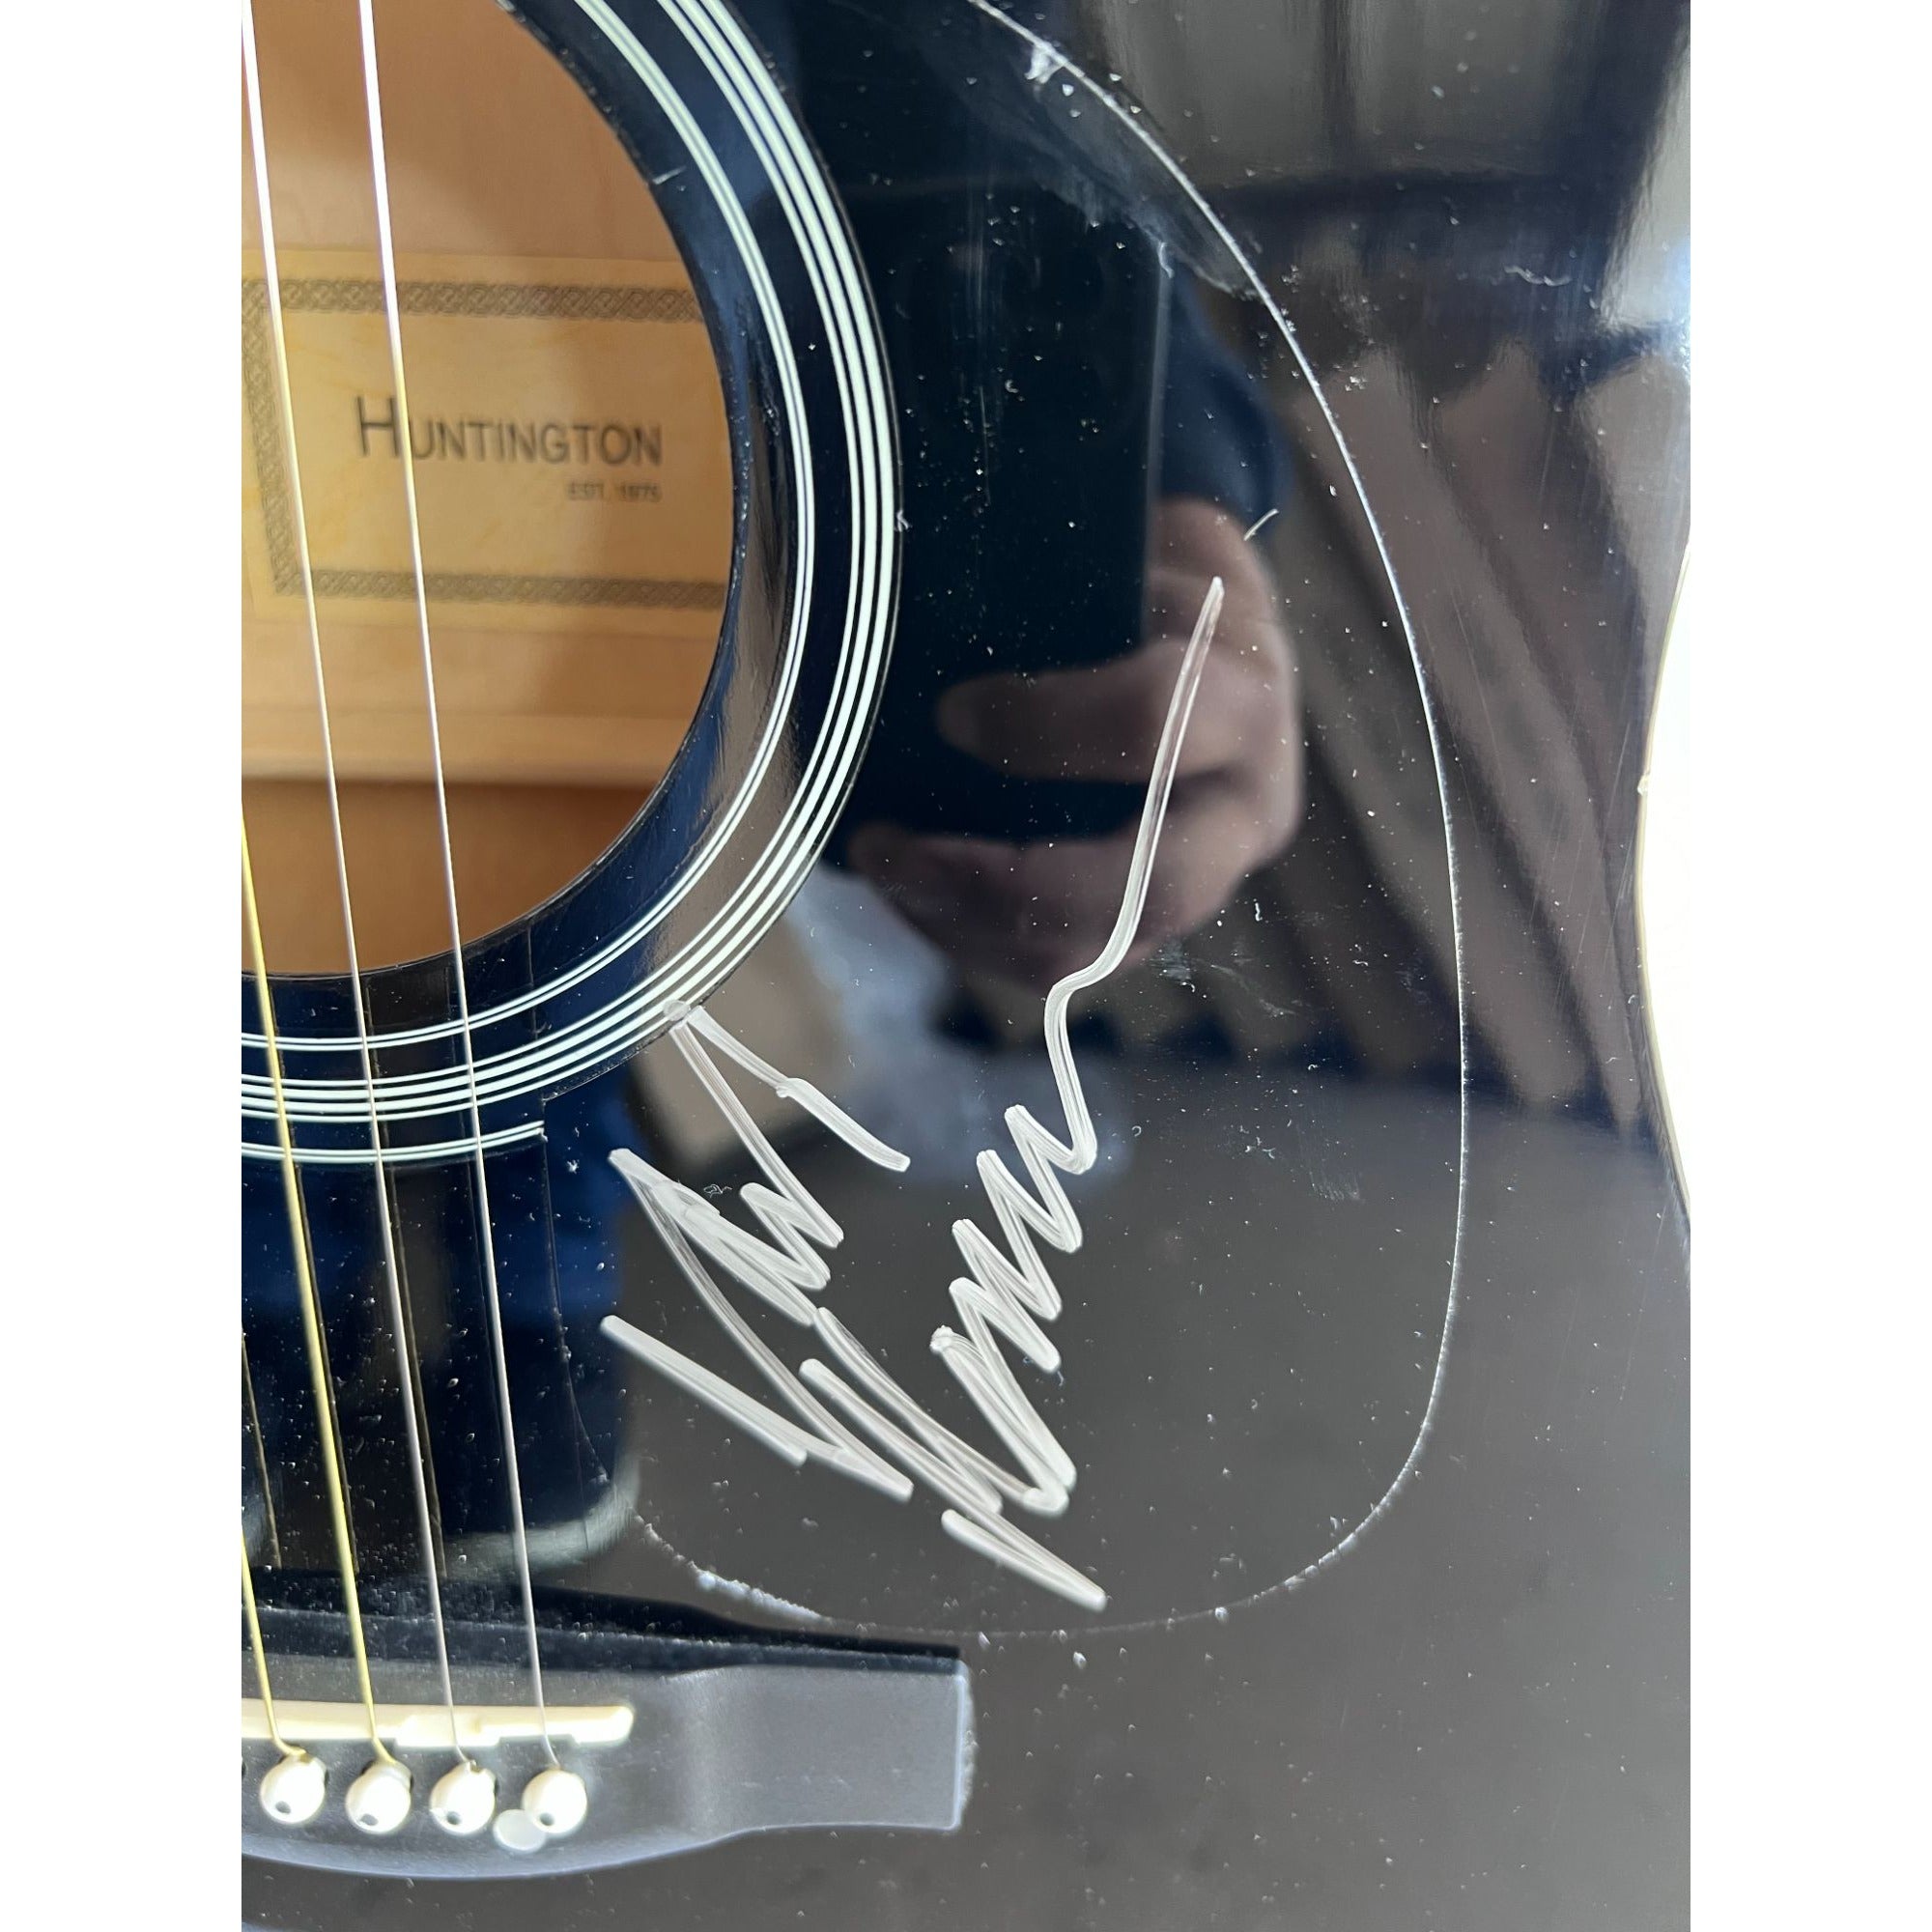 Van Morrison full size Huntington acoustic guitar signed with proof